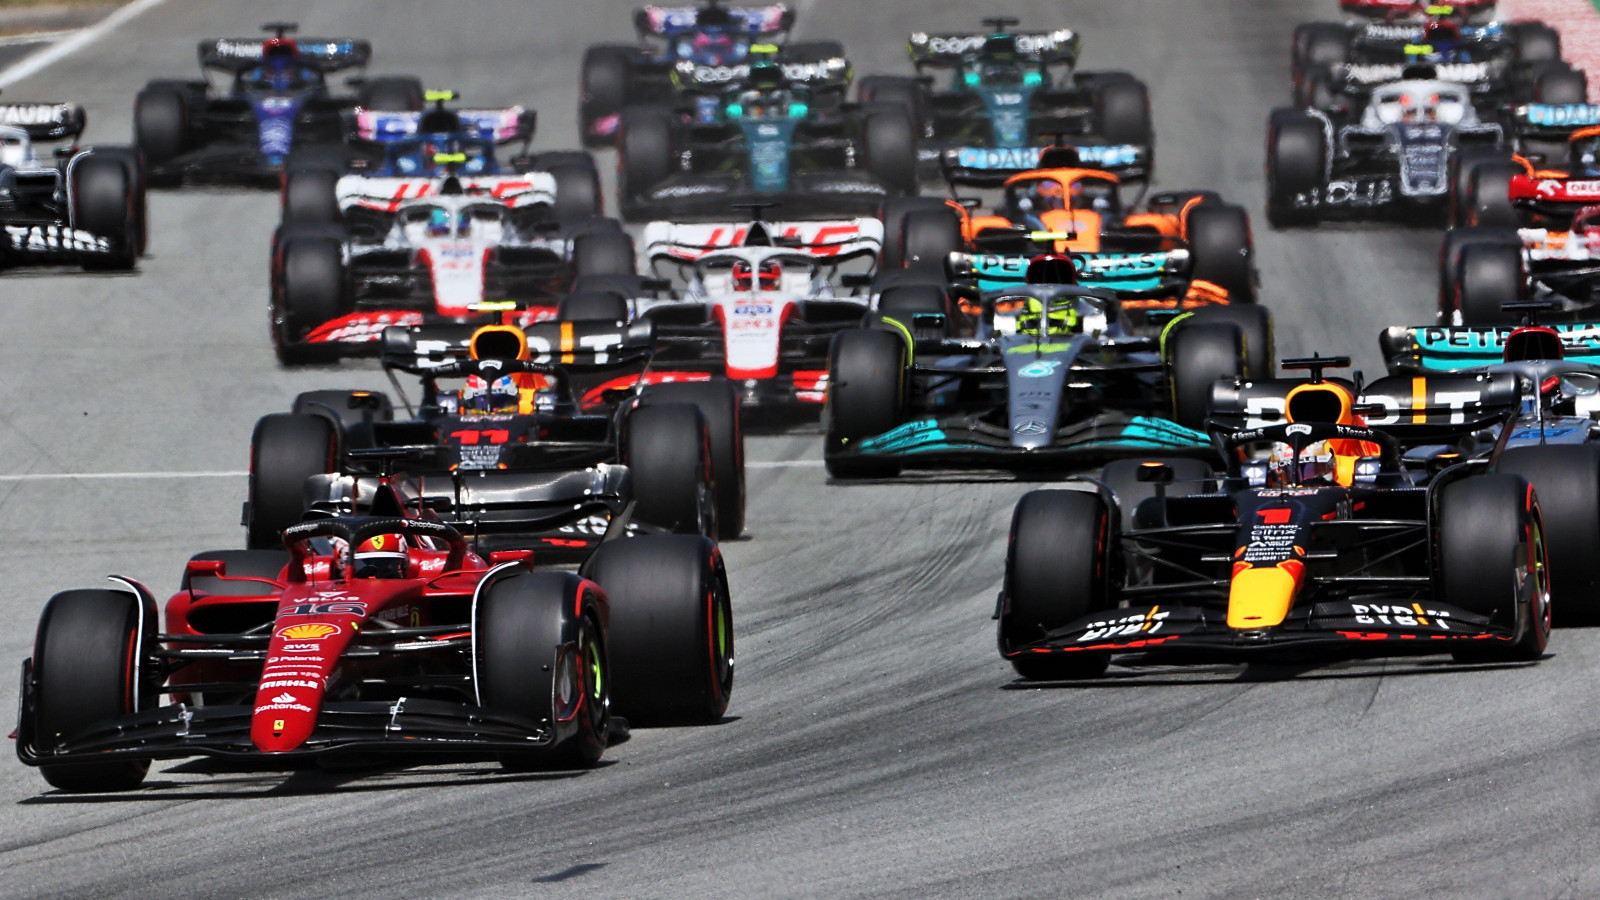 Ferrari's Charles Leclerc leads Red Bull's Max Verstappen into Turn 1 at the 2022 Spanish Grand Prix. Barcelona, May 2022. Results